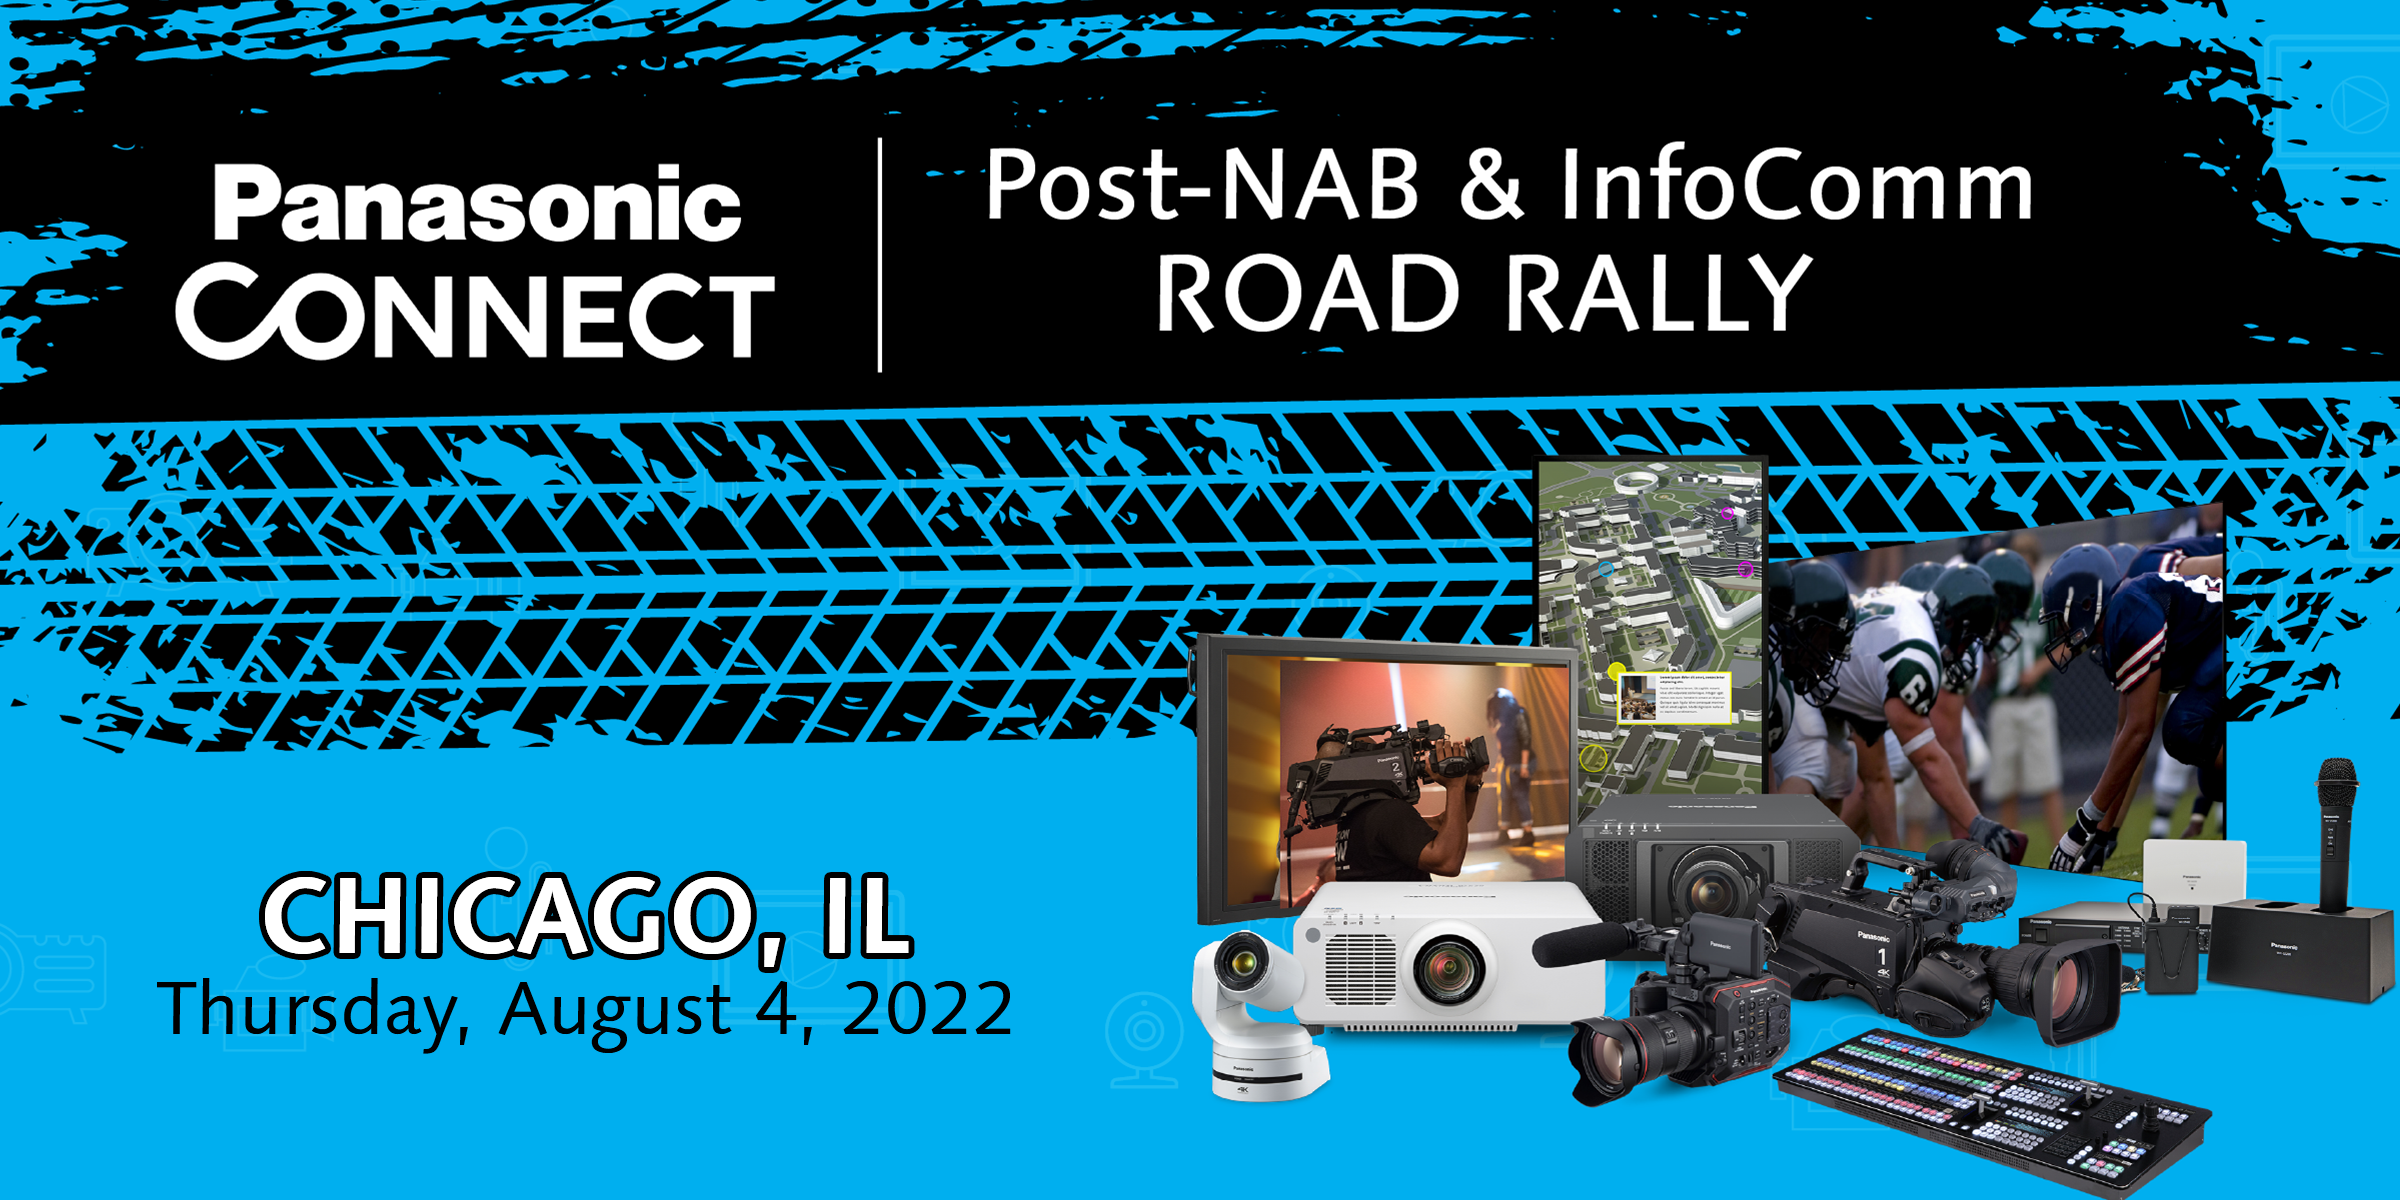 Panasonic Connect Chicago Road Rally - New Lock Up